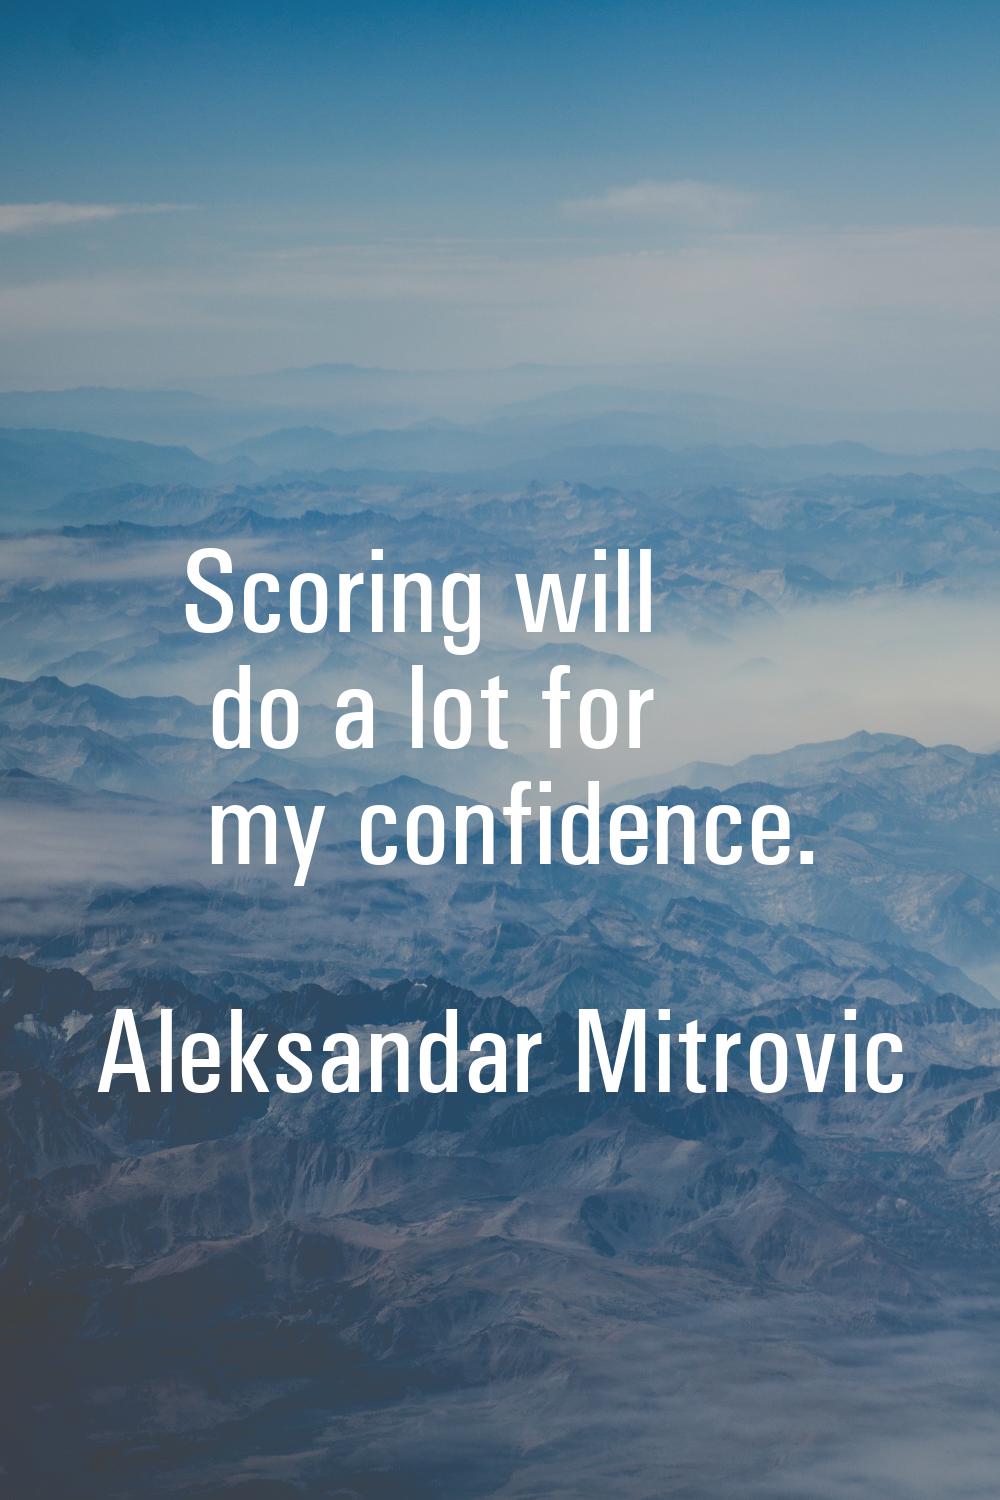 Scoring will do a lot for my confidence.